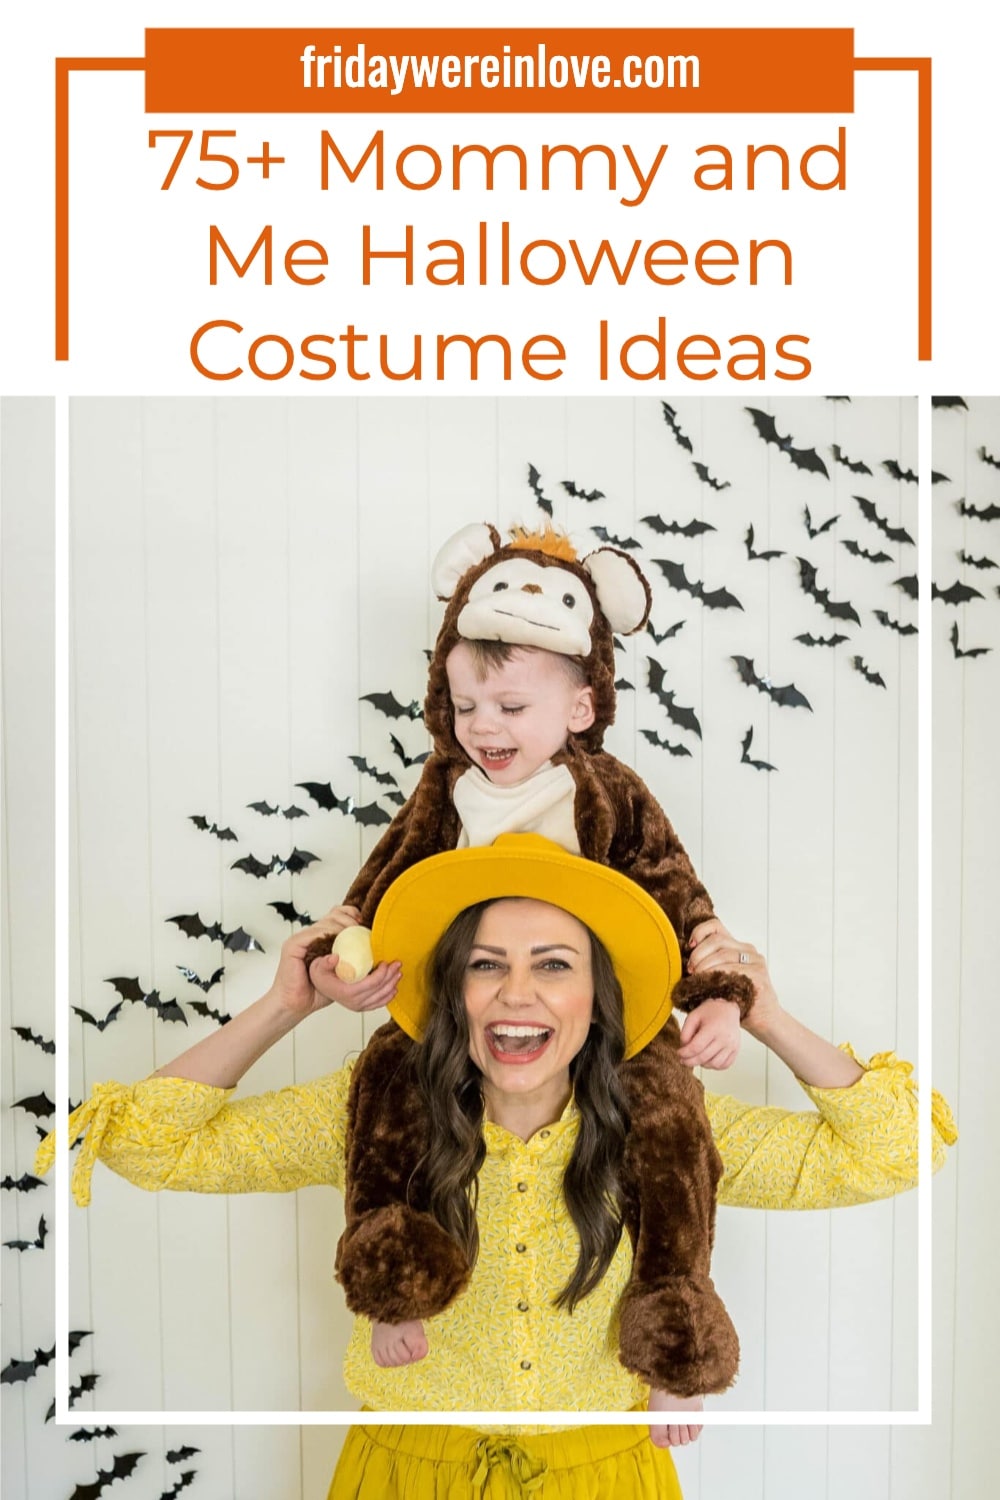 Mommy and Me Halloween Costume - Friday We're In Love